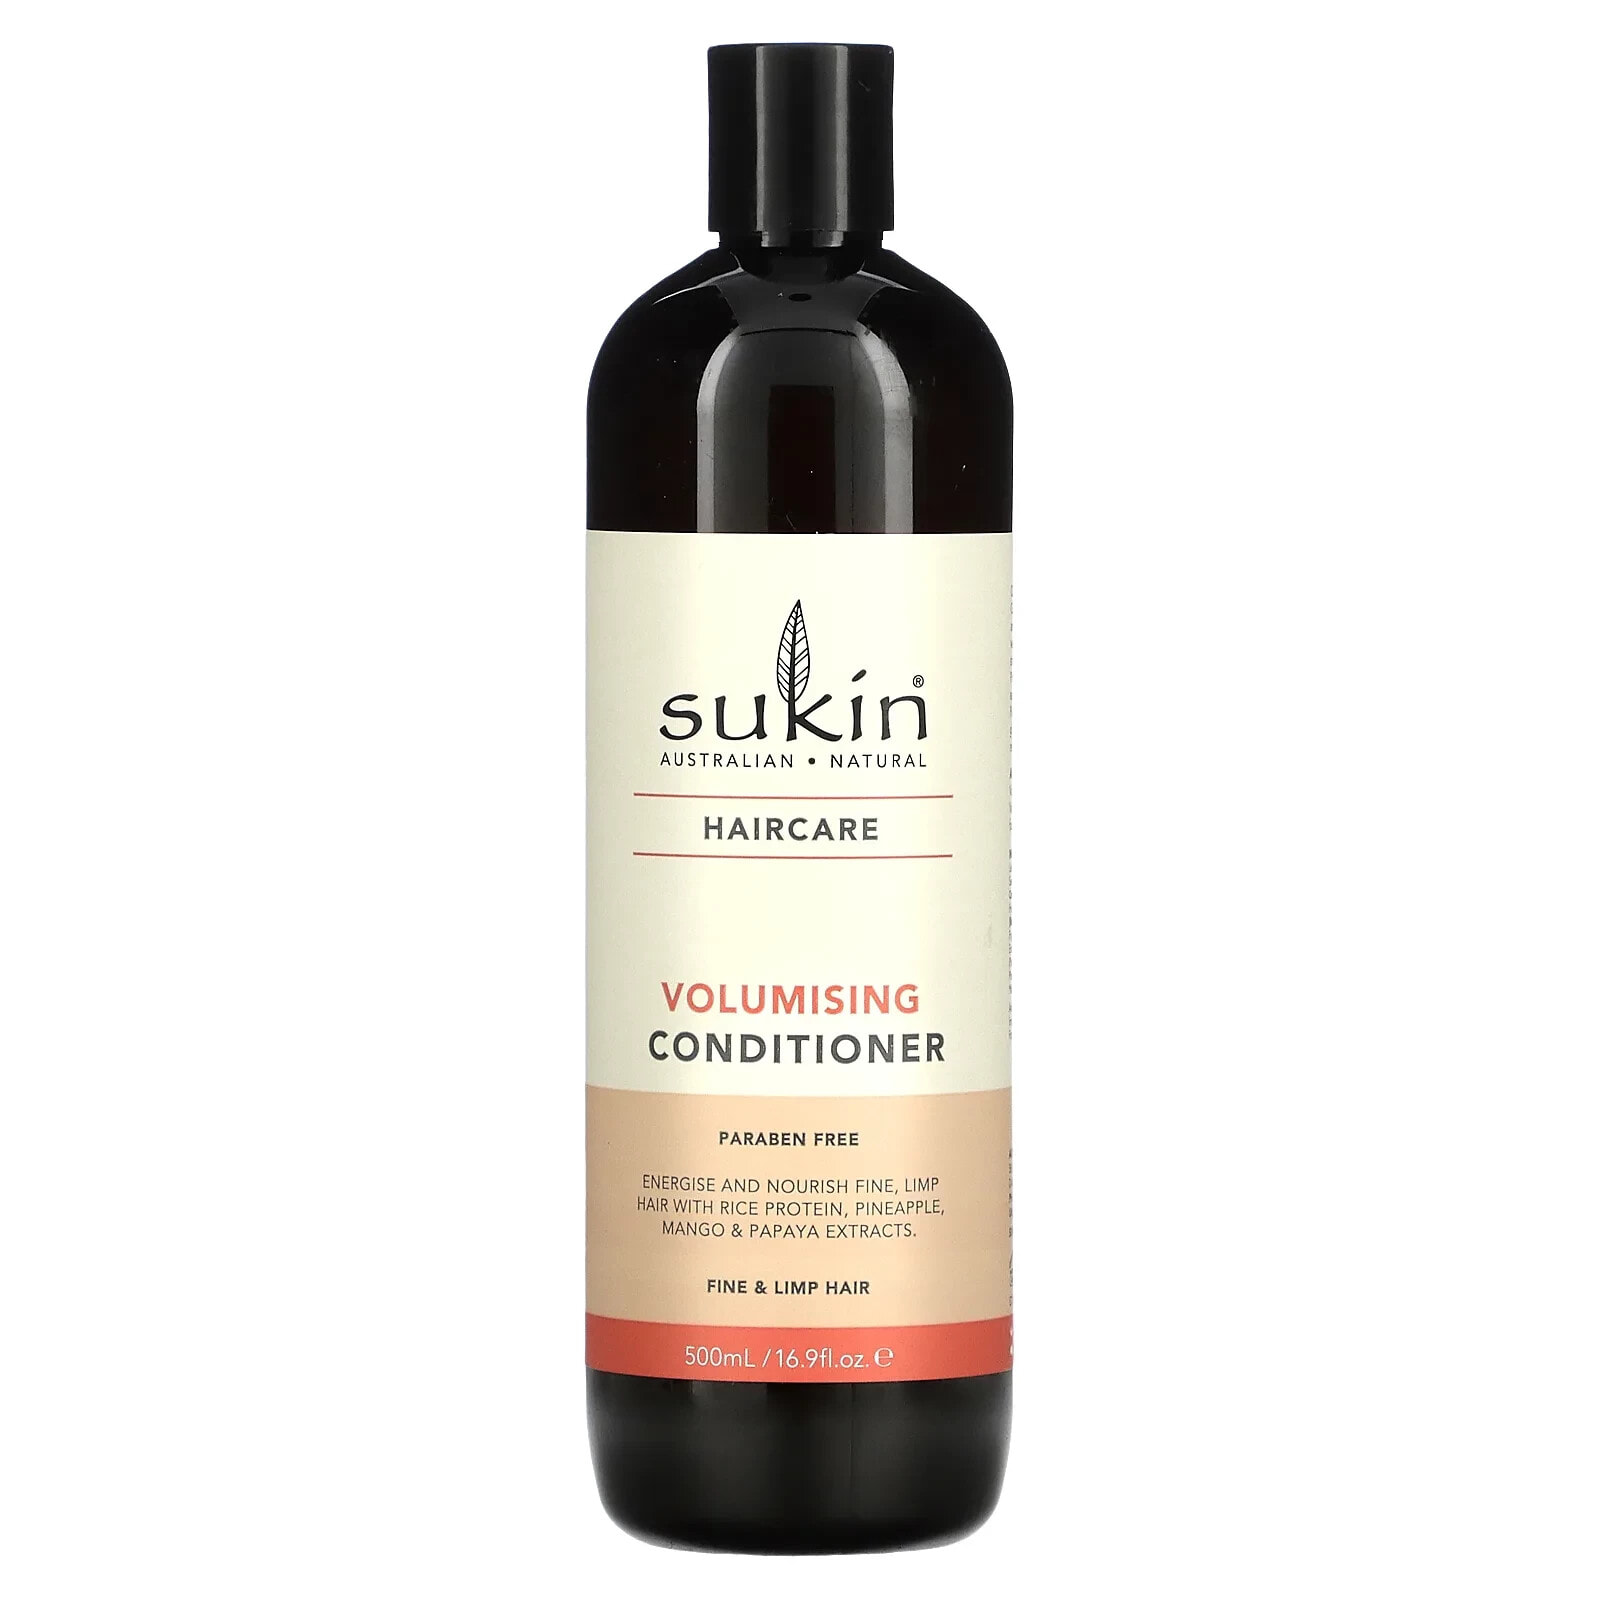 Haircare, Volumising Conditioner, Fine and Limp Hair, 16.9 fl oz (500 ml)